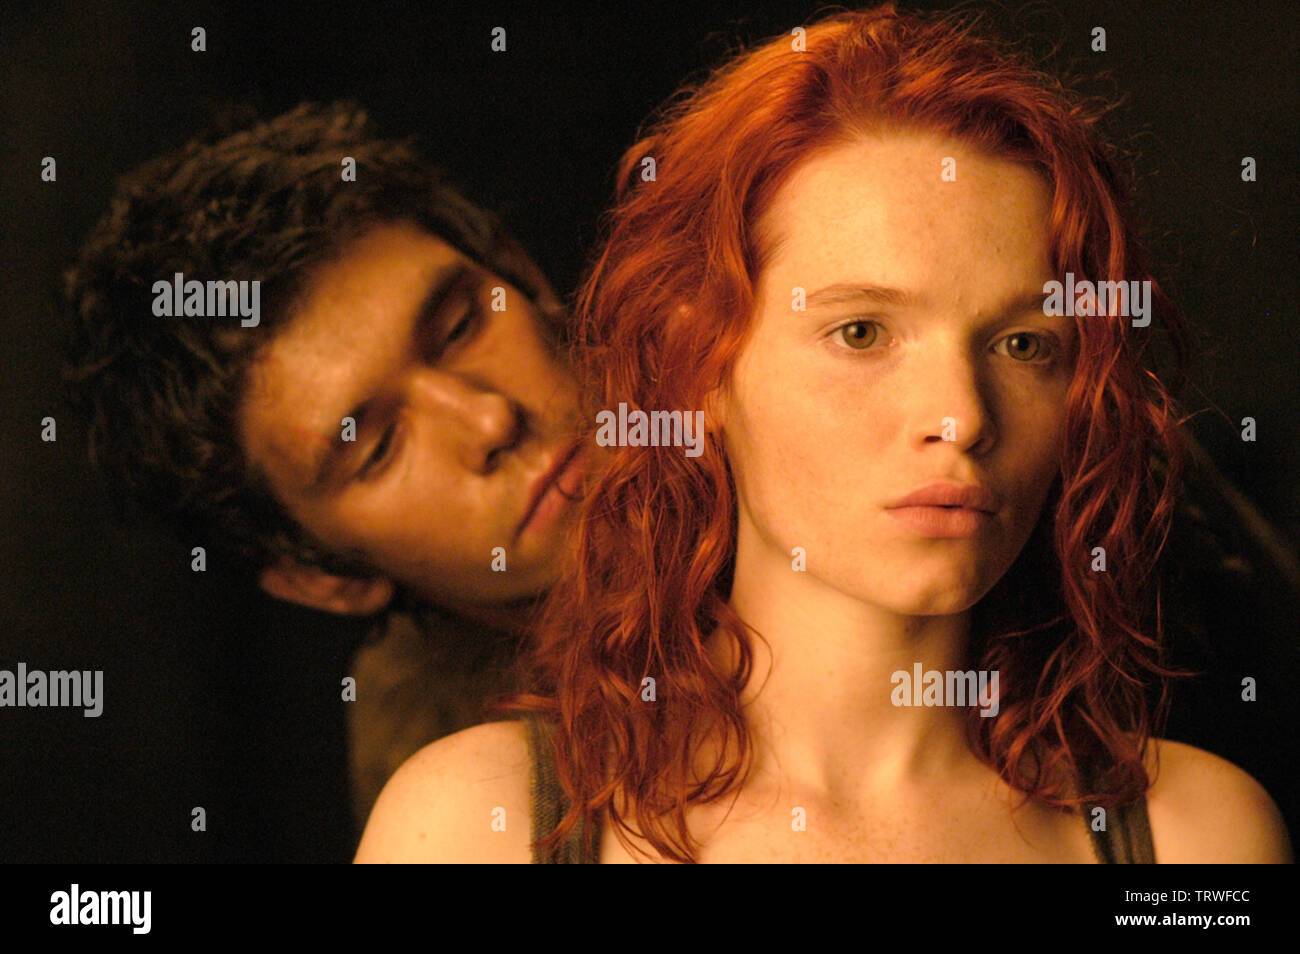 KAROLINE HERFURTH and BEN WHISHAW in PERFUME: THE STORY OF A MURDERER (2006). Copyright: Editorial use only. No merchandising or book covers. This is a publicly distributed handout. Access rights only, no license of copyright provided. Only to be reproduced in conjunction with promotion of this film. Credit: DREAMWORKS / Album Stock Photo